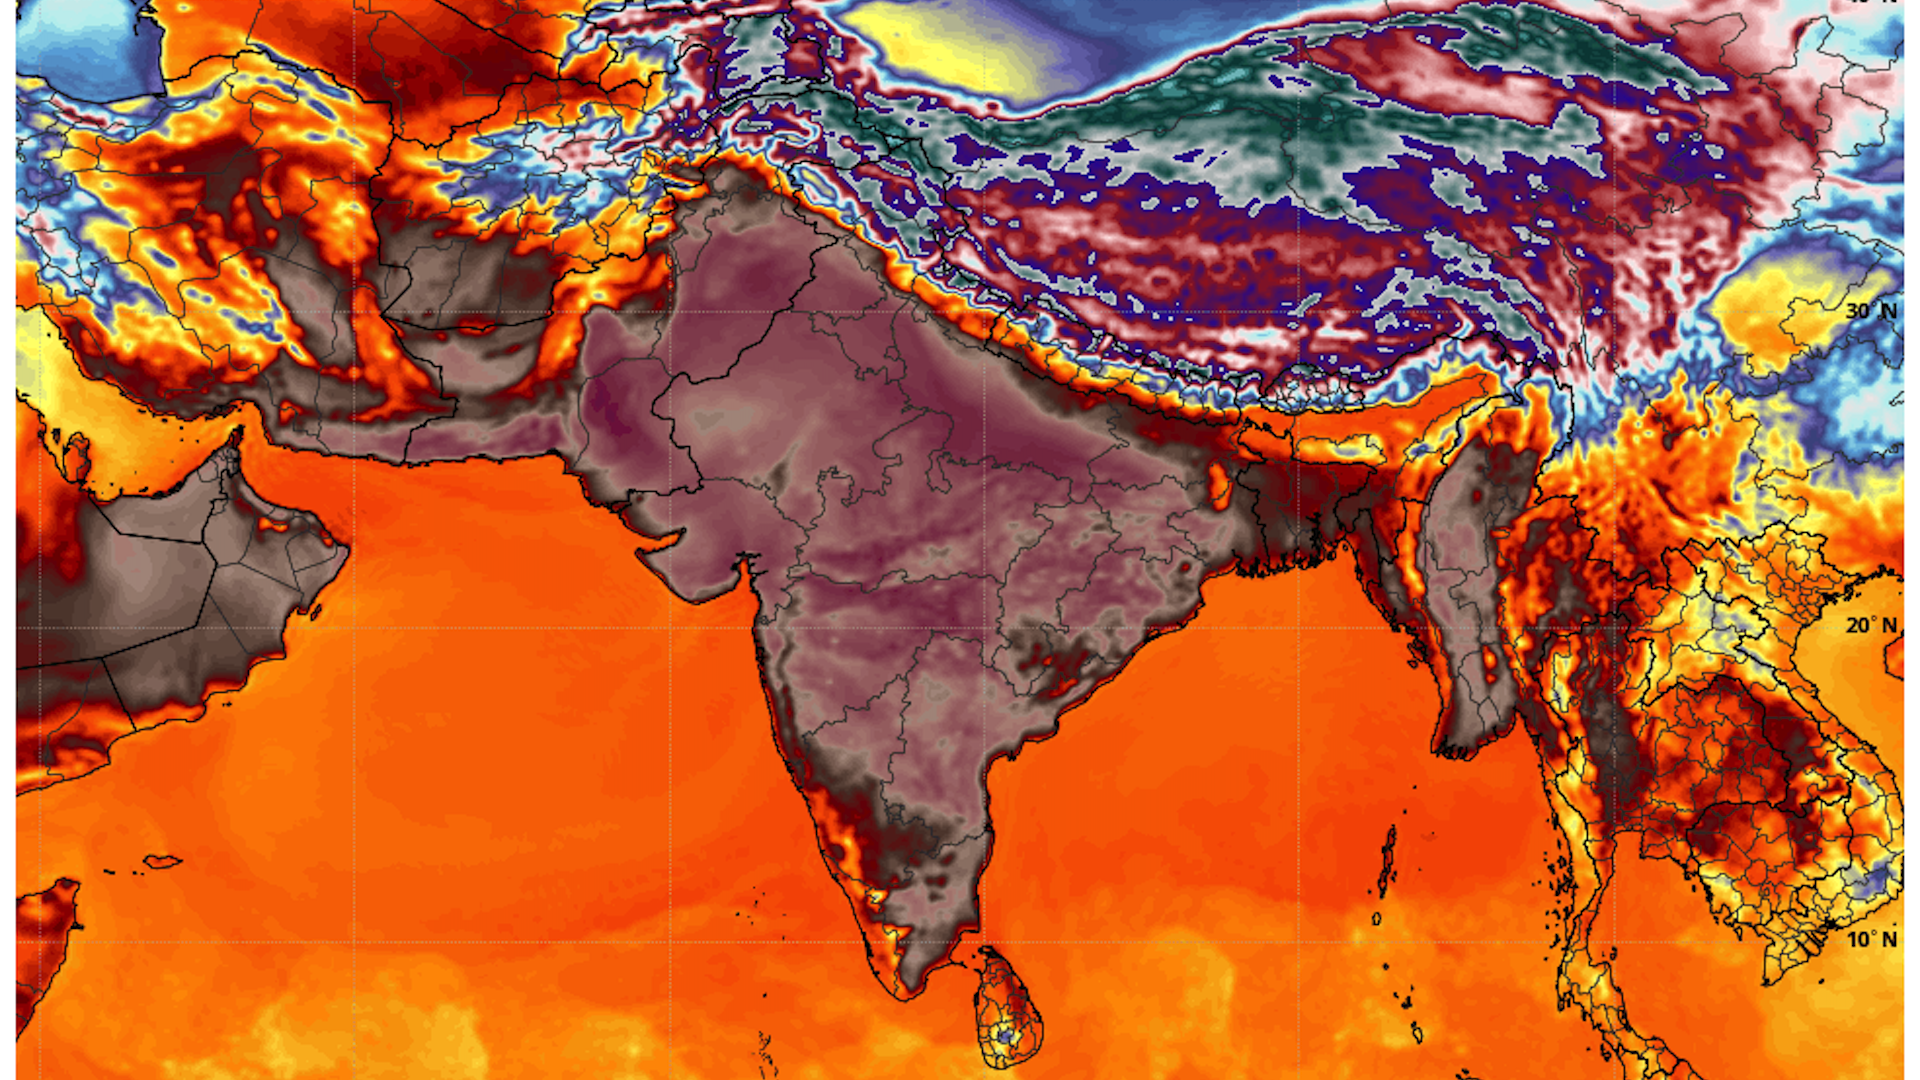 Computer model projection of high temperatures across South Asia on April 29, 2022.